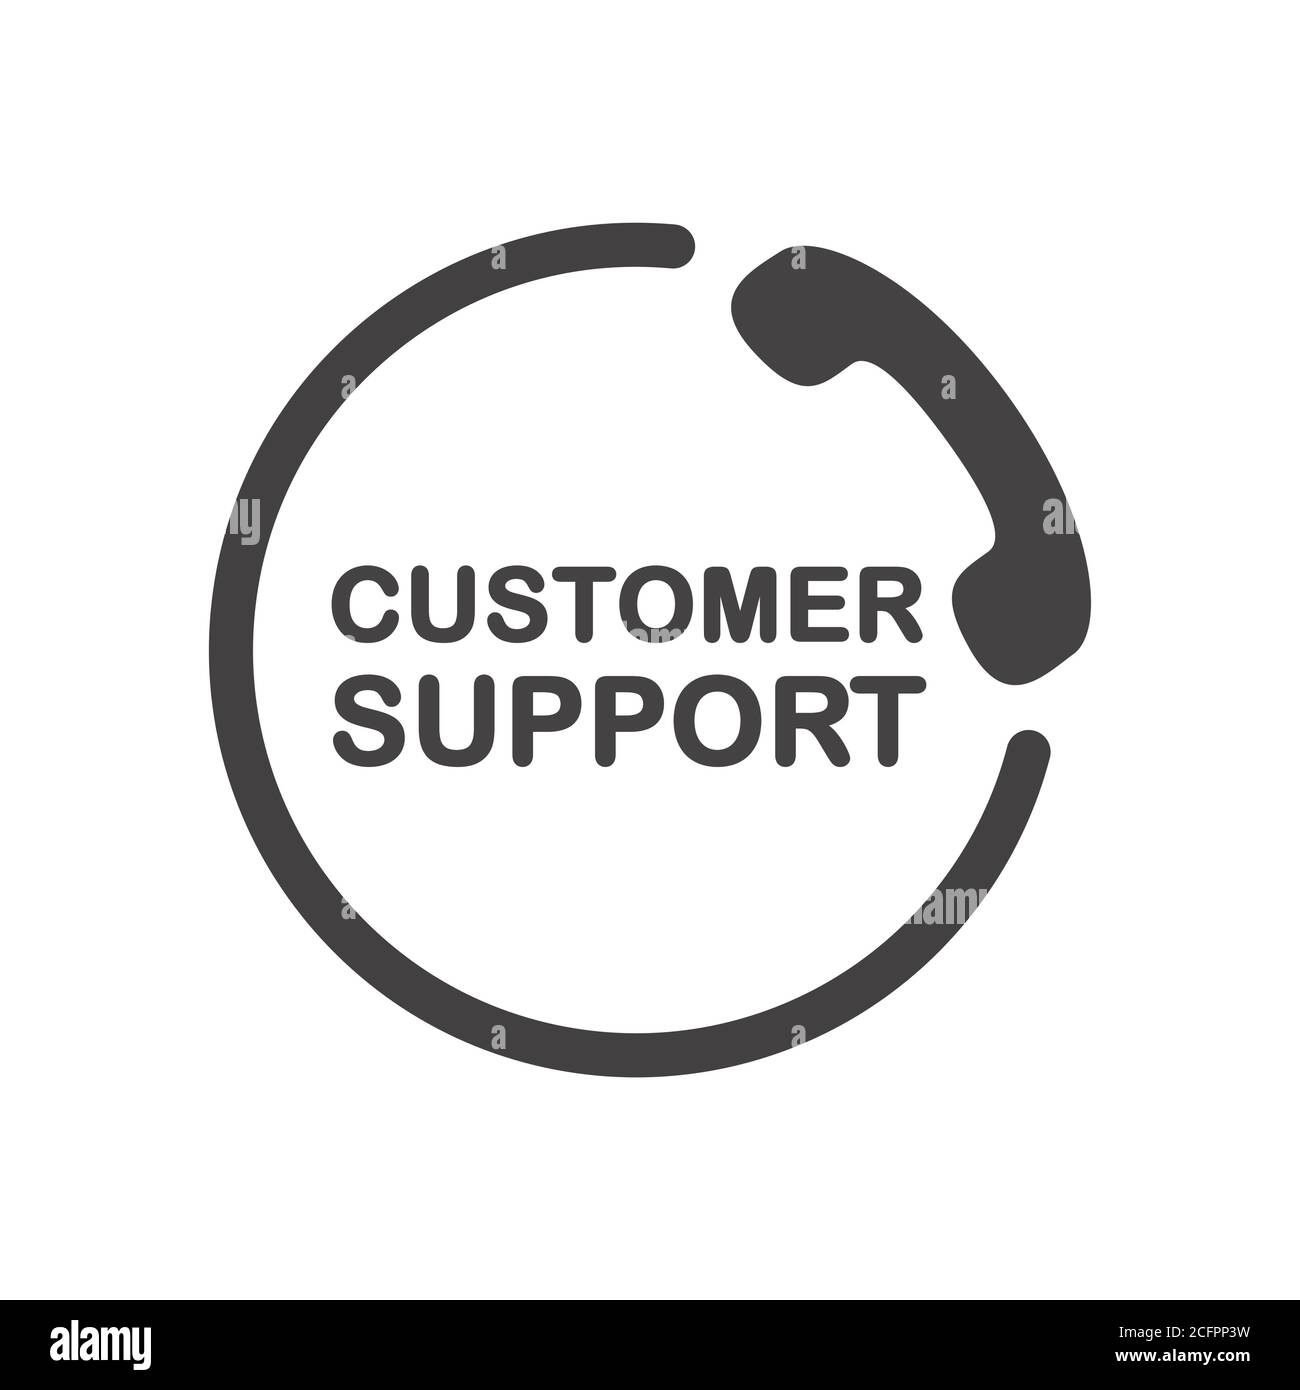 Customer support icon. Attendance number symbol. Black sign on white background. Stock Vector